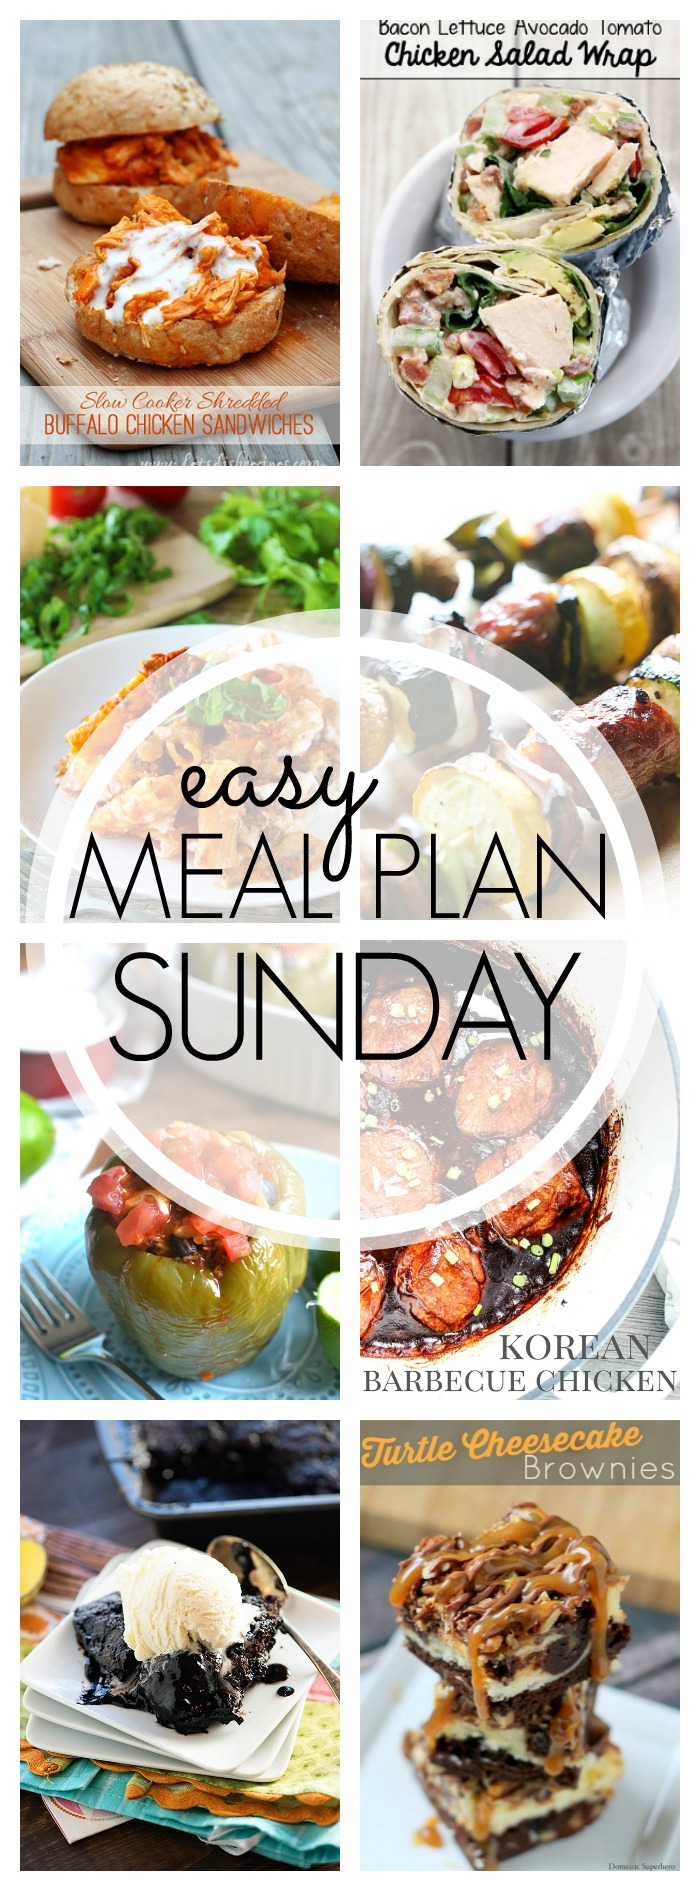 Easy Meal Plan Sunday #49